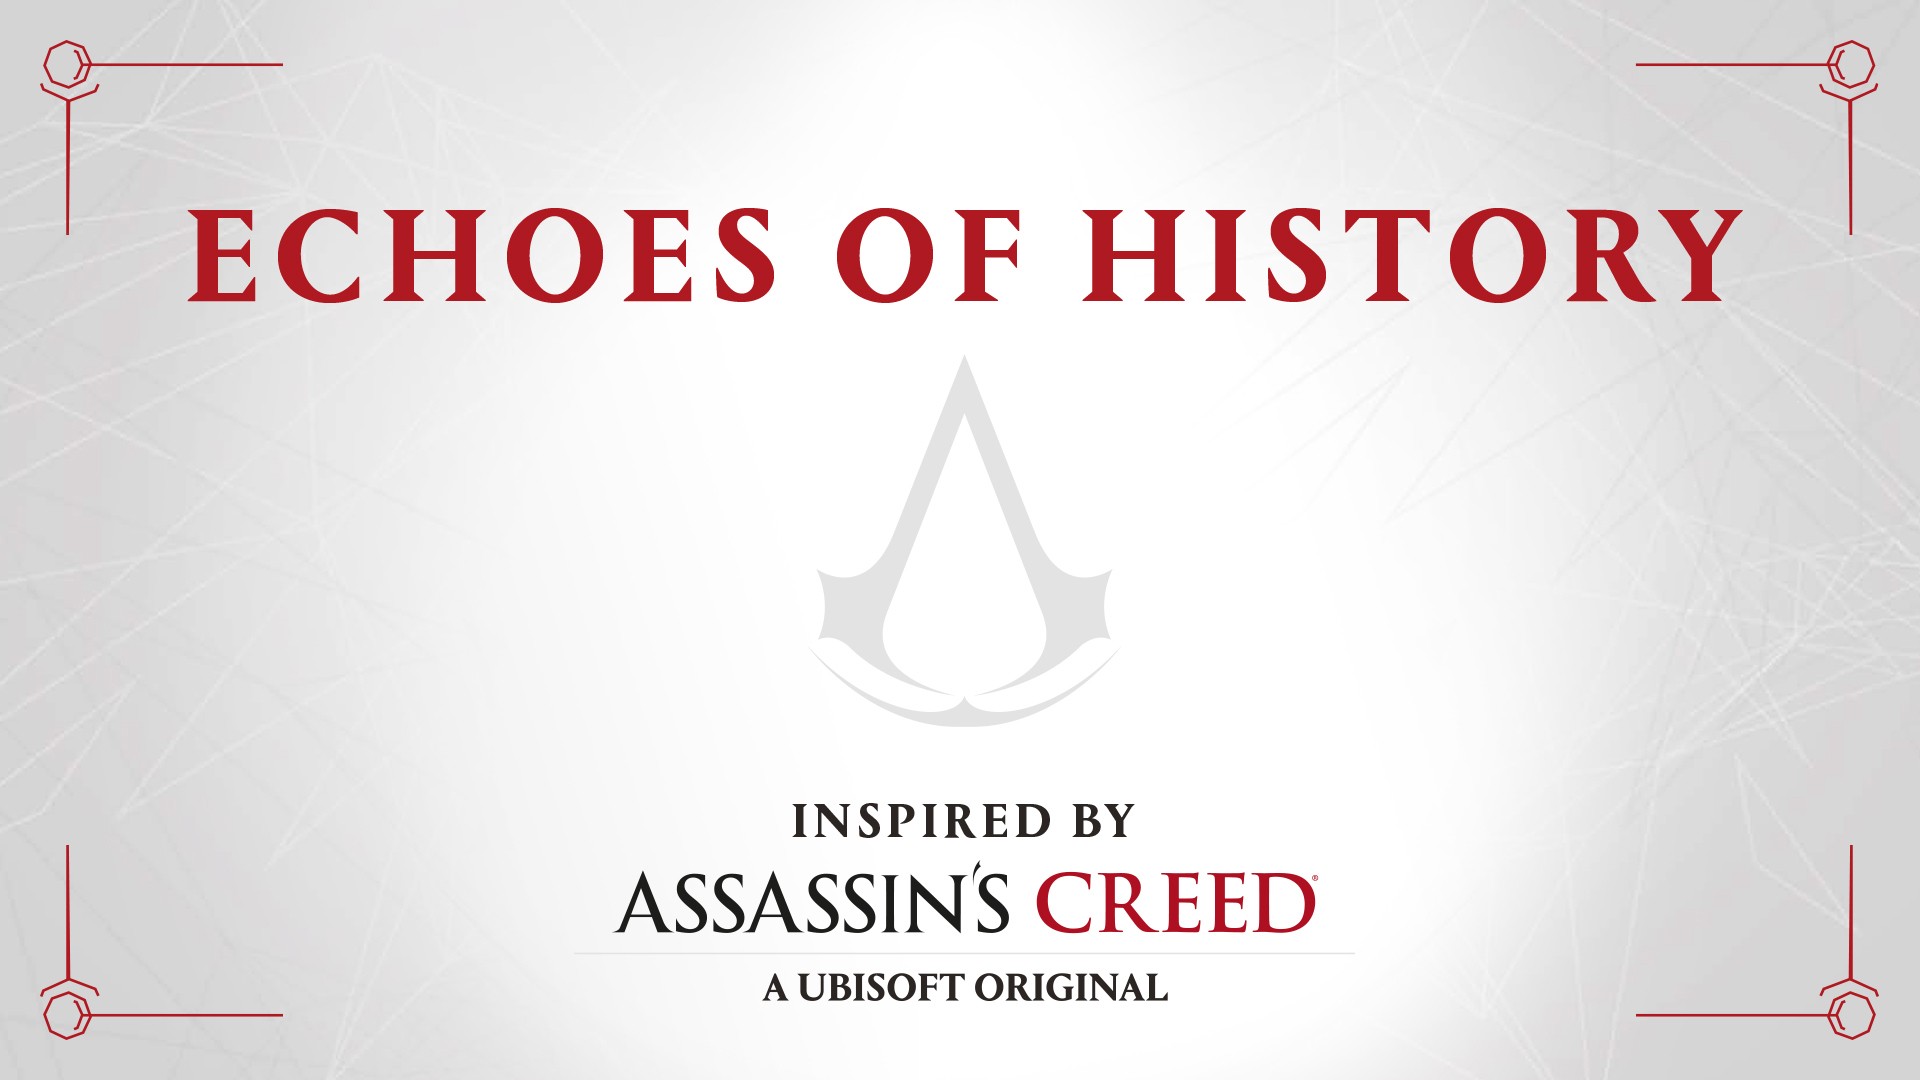 'Echoes Of History' de Assassin's Creed